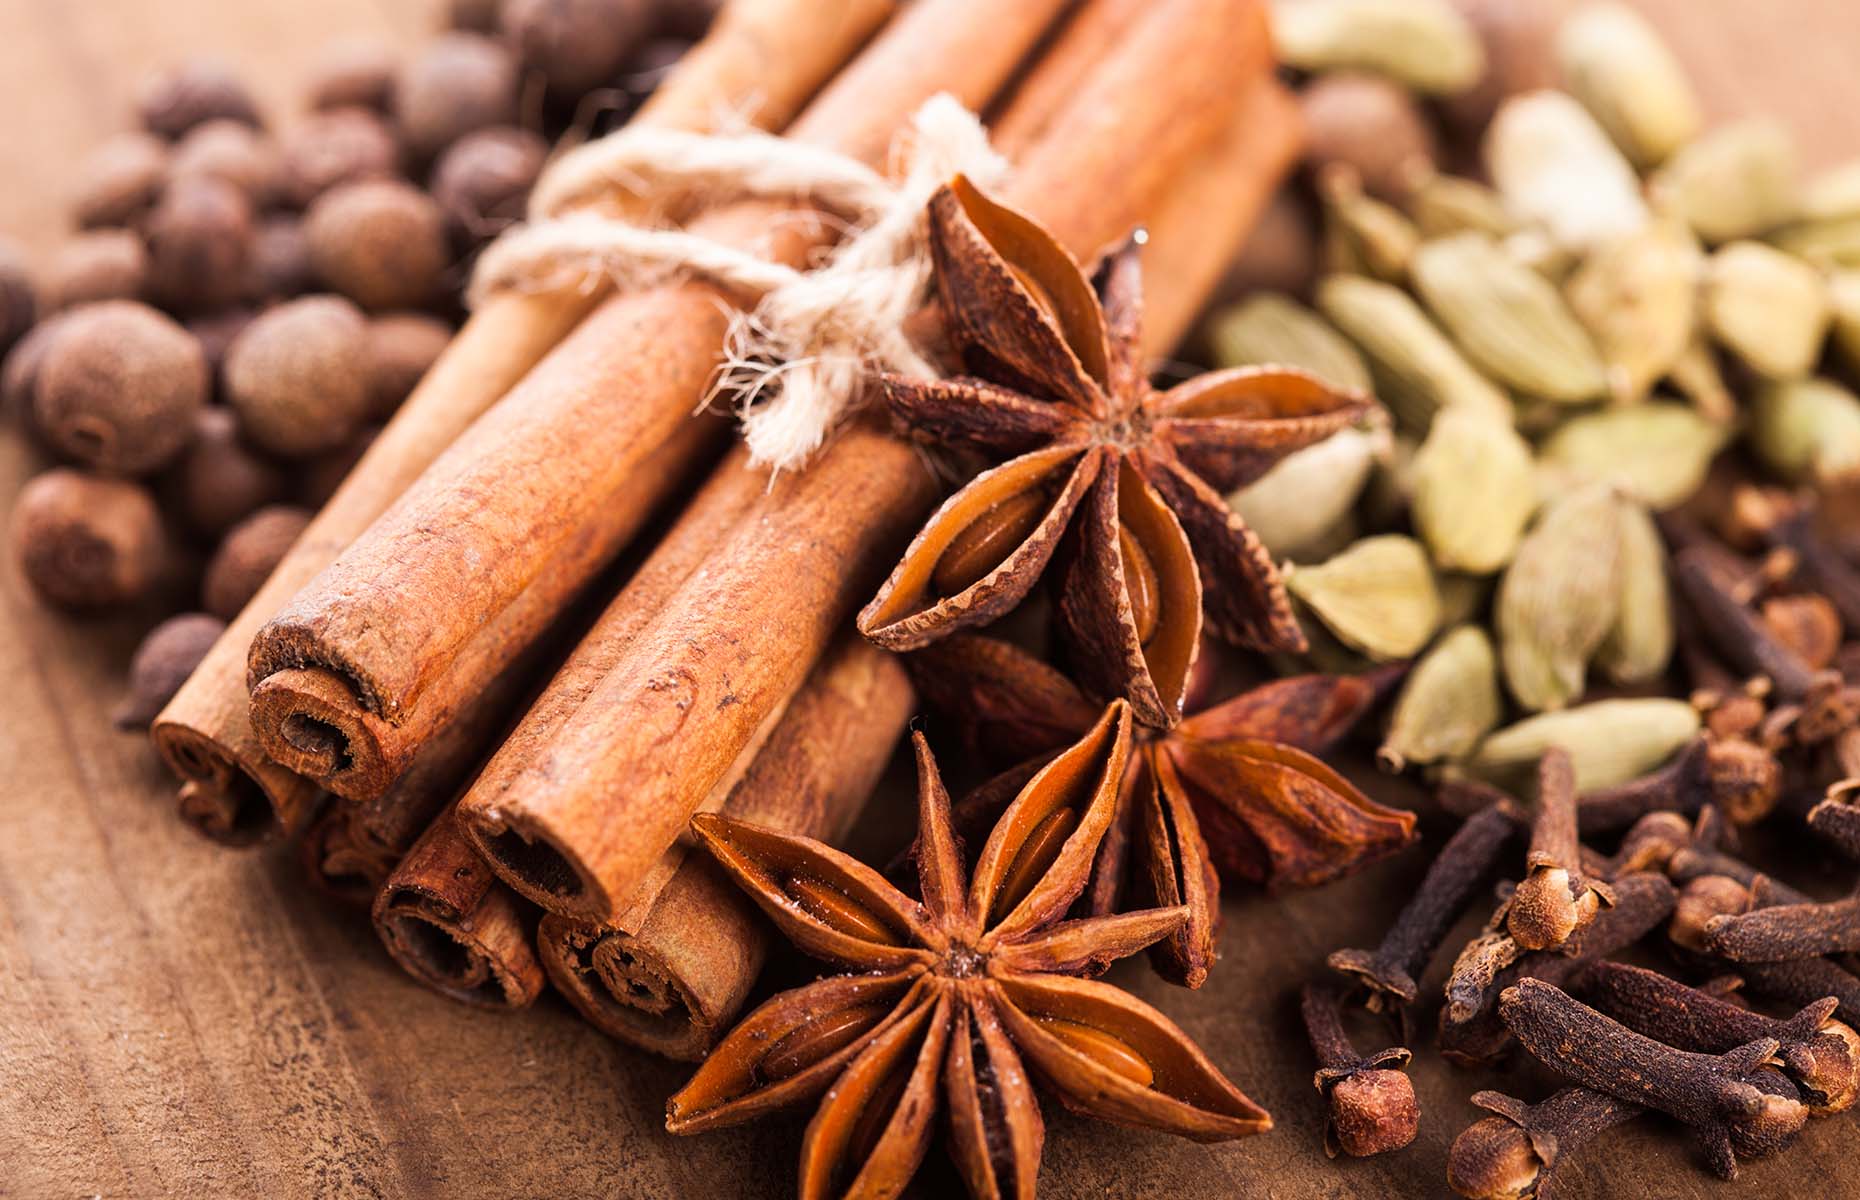 Mixed spices for mulled wine including cinnamon and whole cloves (Image: Oksana Shufrych/Shutterstock)